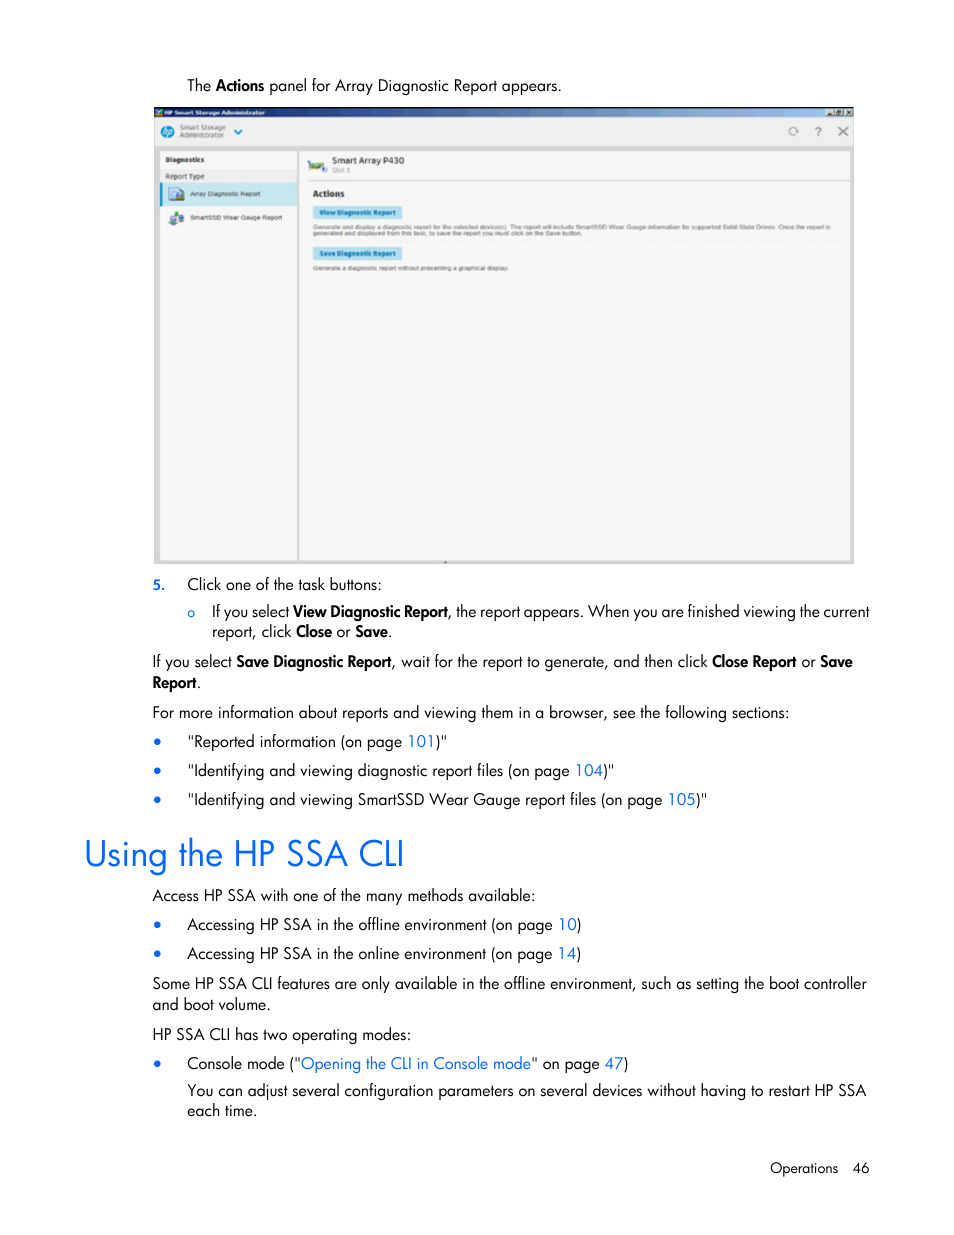 Using the hp ssa cli | HP Smart Storage Administrator User Manual | Page 46 / 127